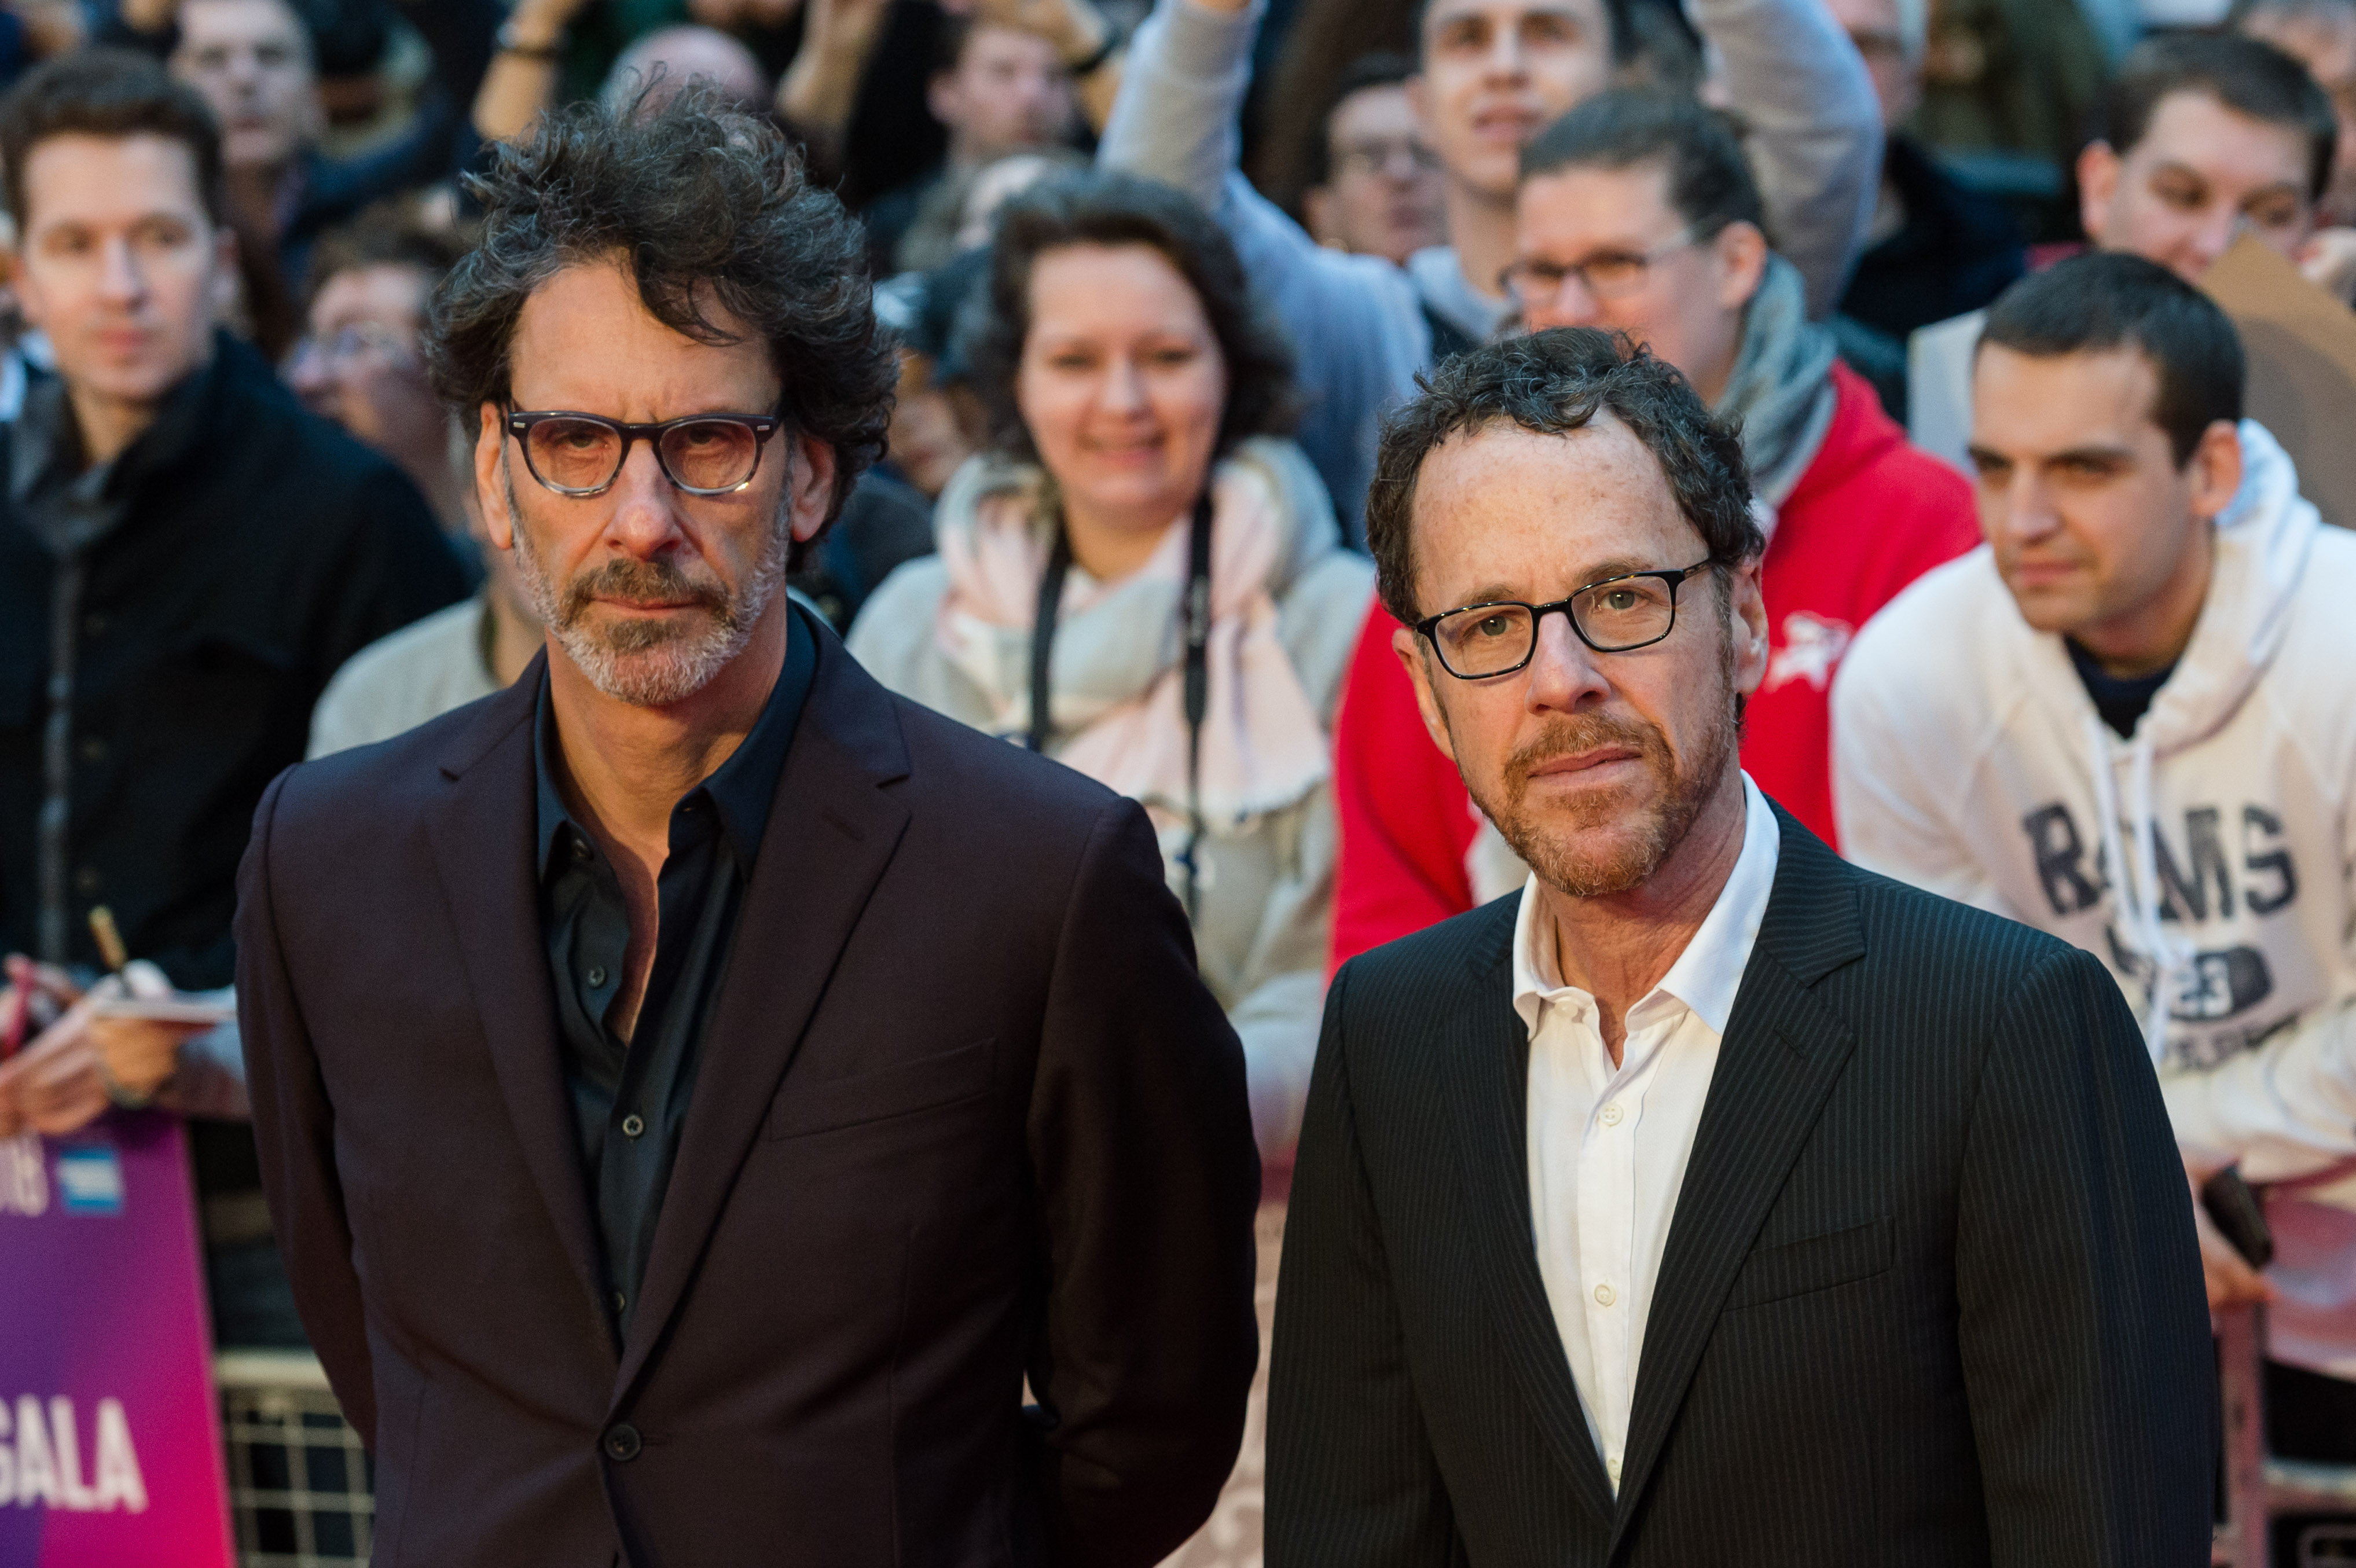 Coen Brothers on New Netflix Series: "We Are Streaming Motherfuckers!"